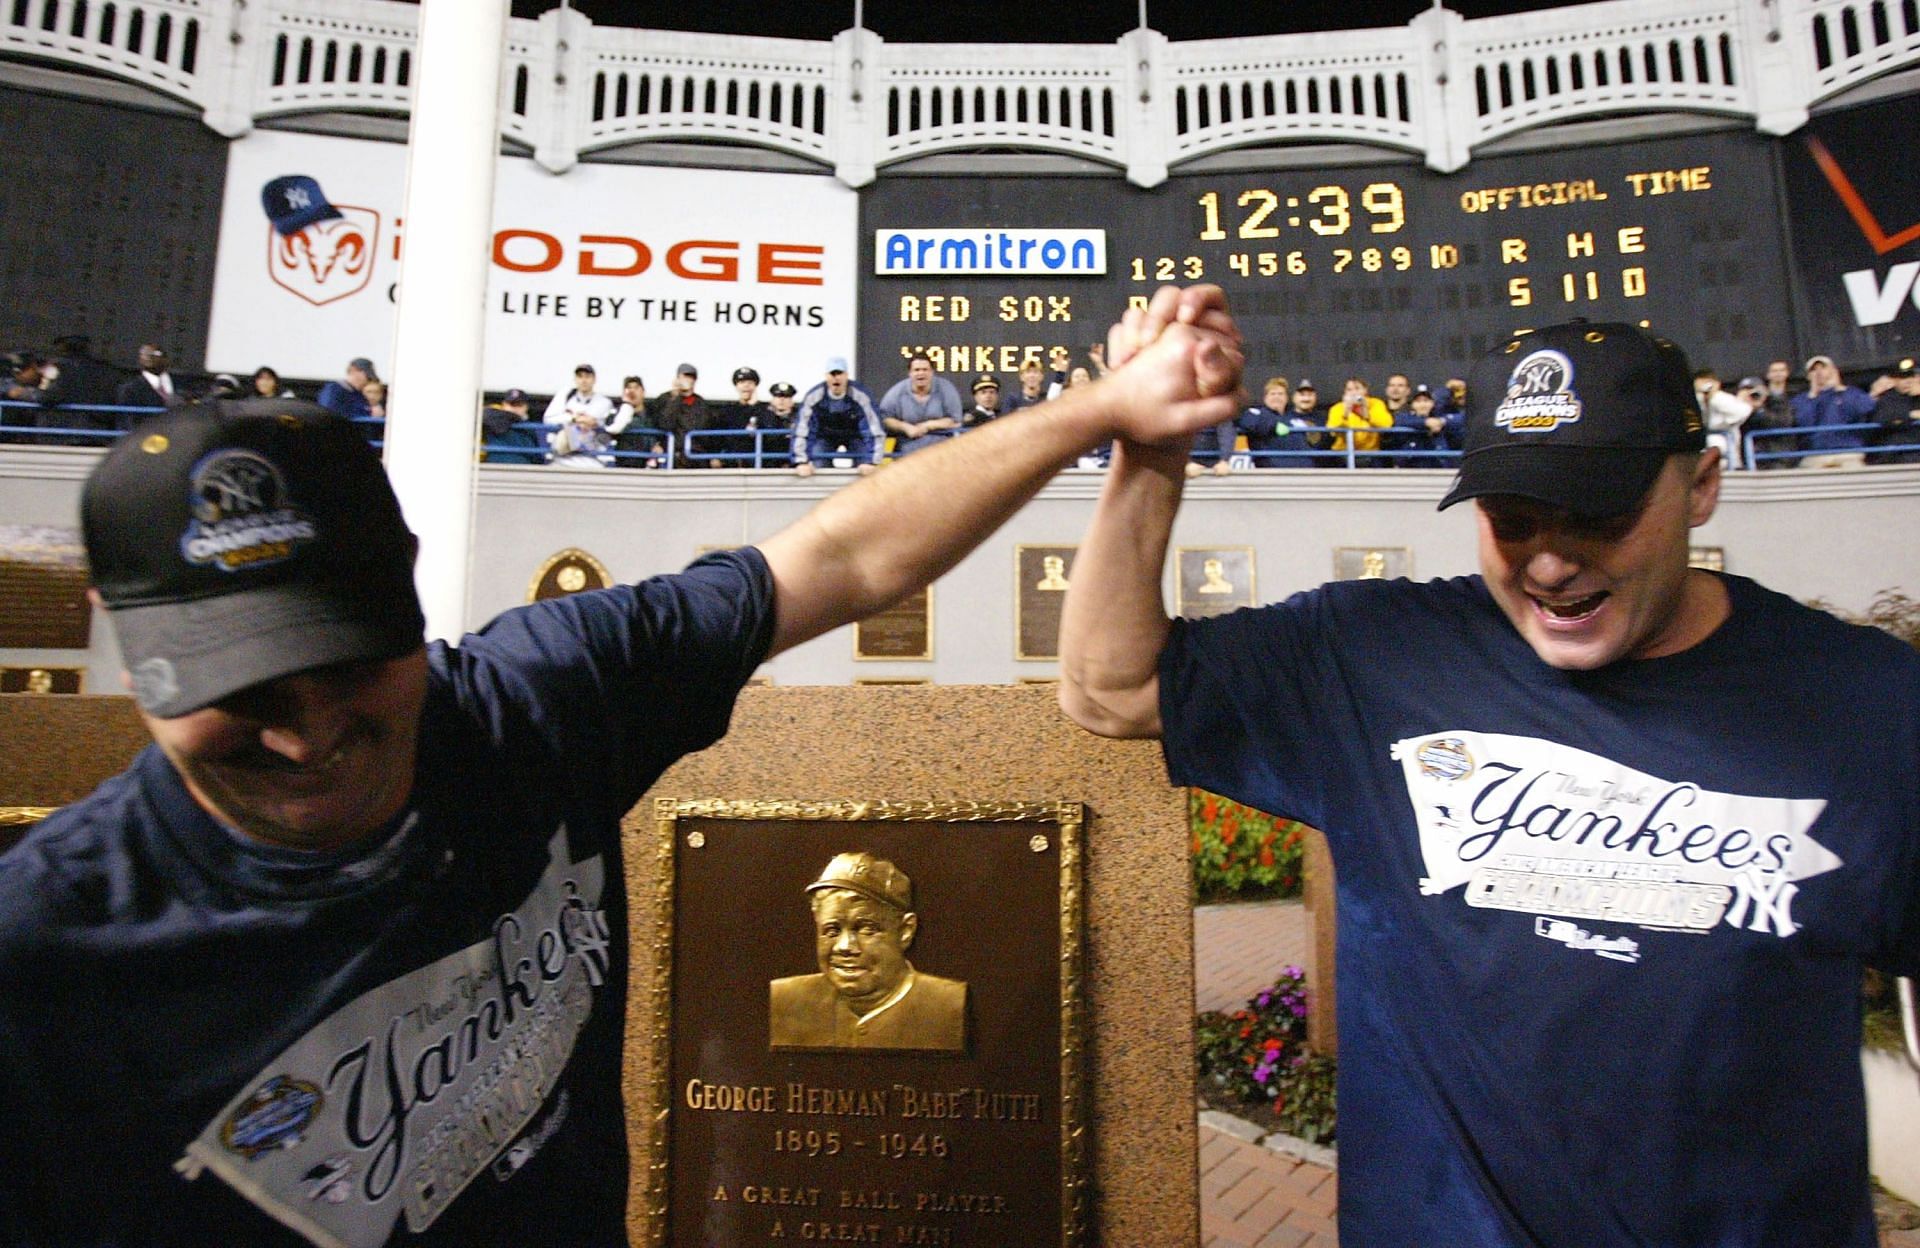 Clemens celebrating the Yankees 2003 ALCS victory over the Boston Red Sox